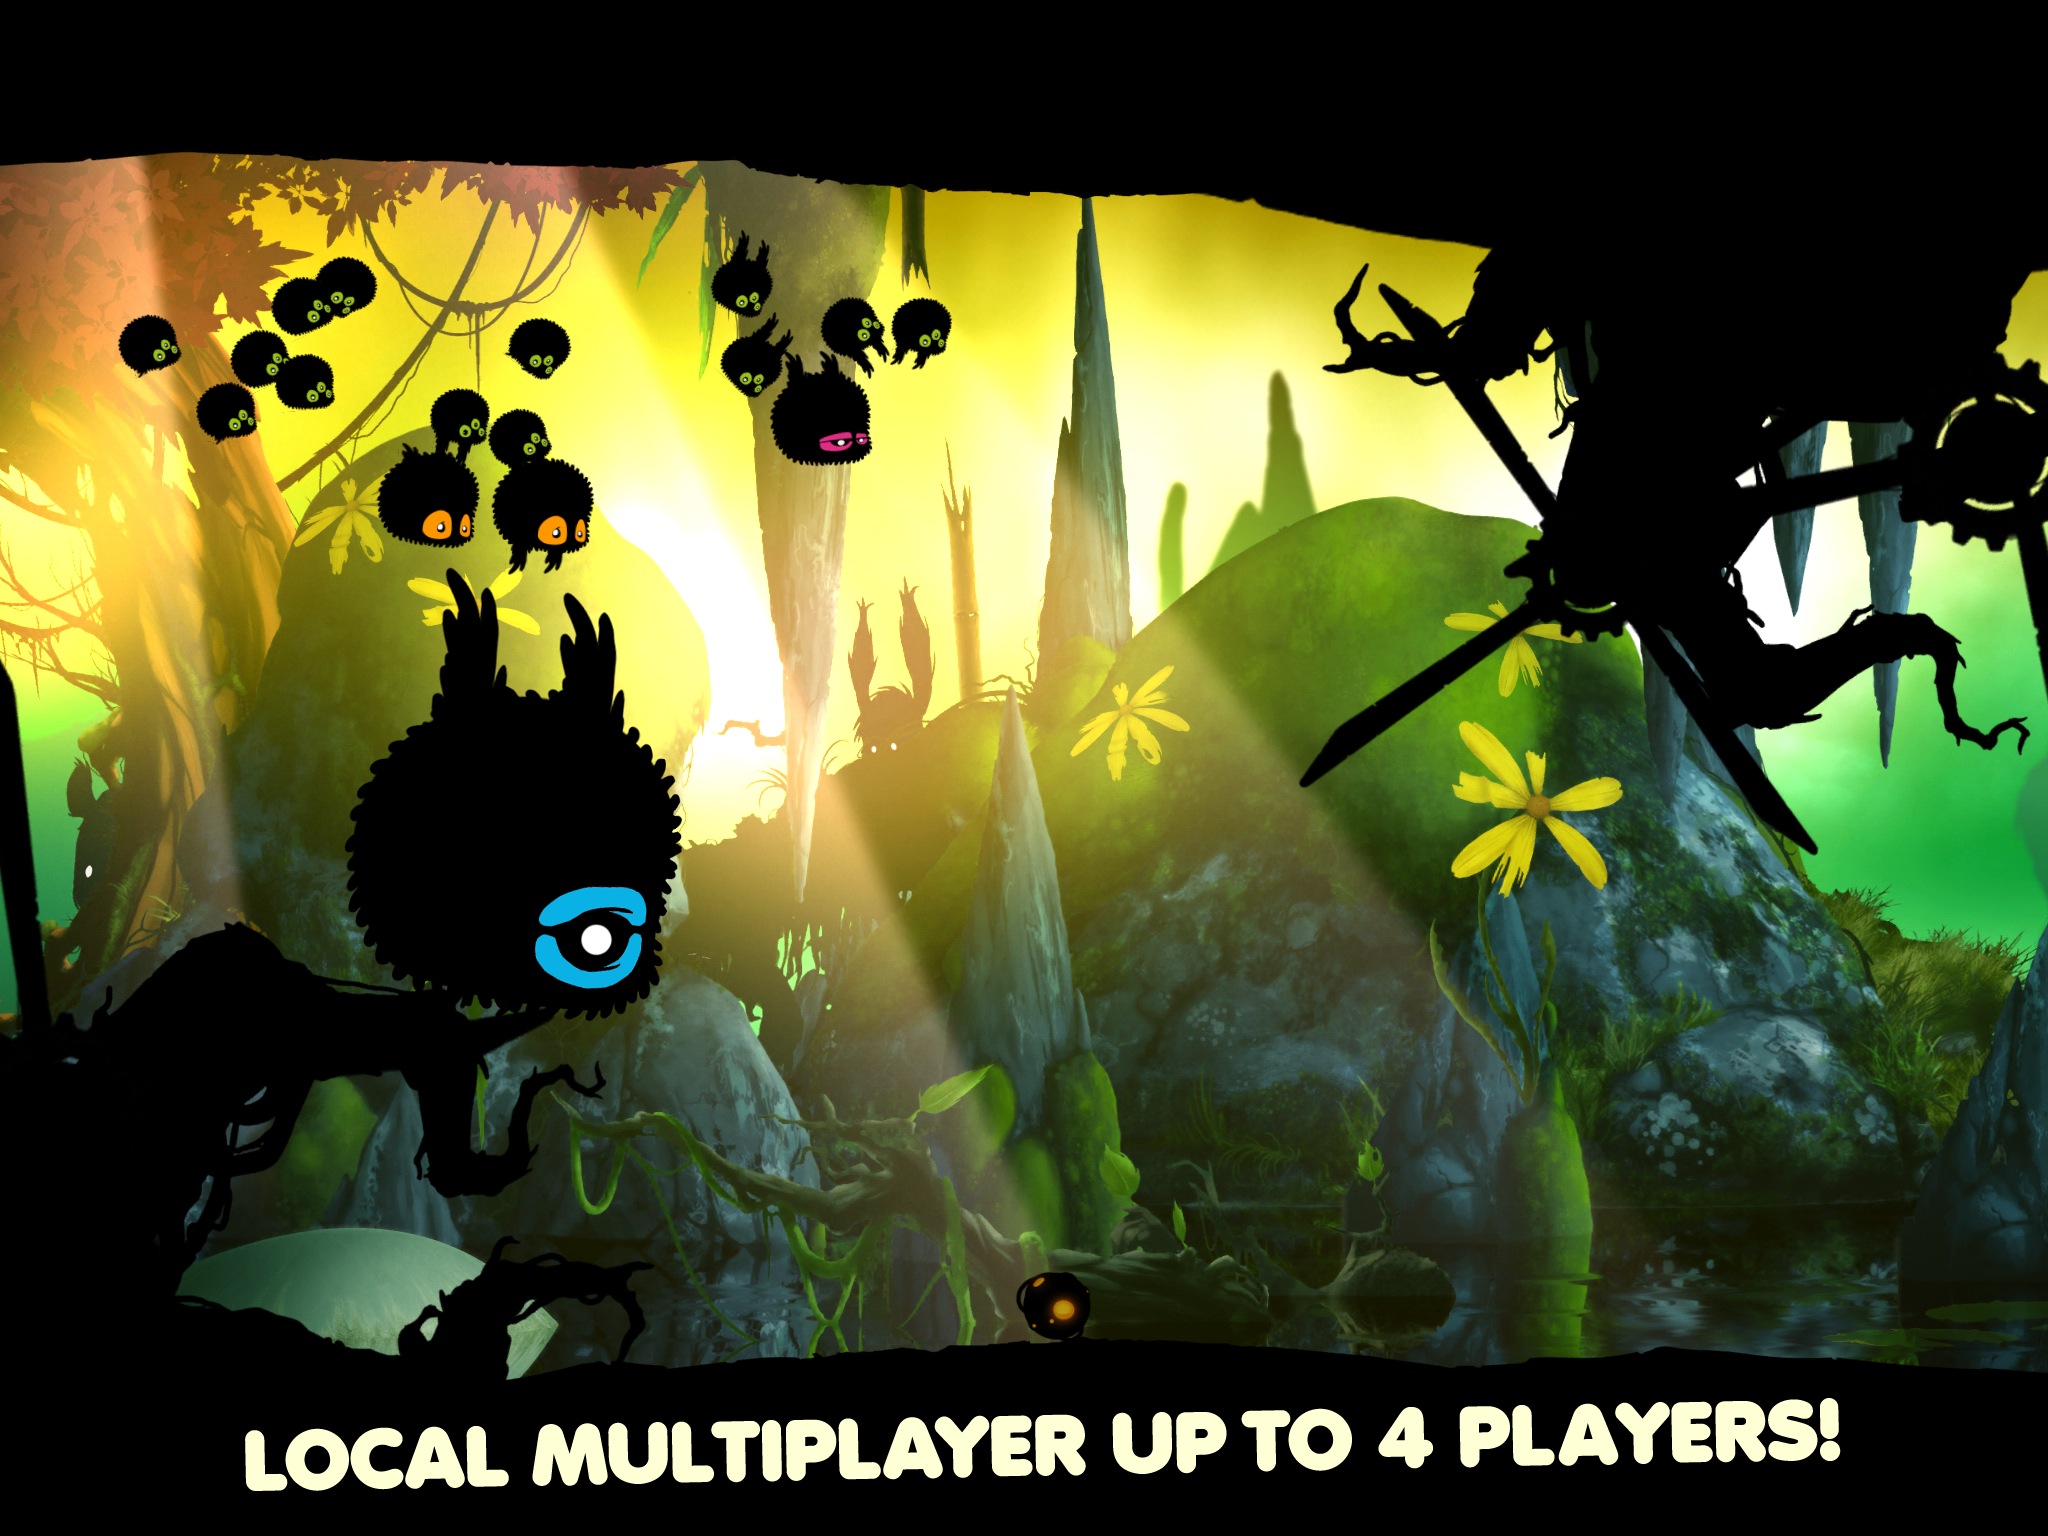 What Is Happening With Badland Games